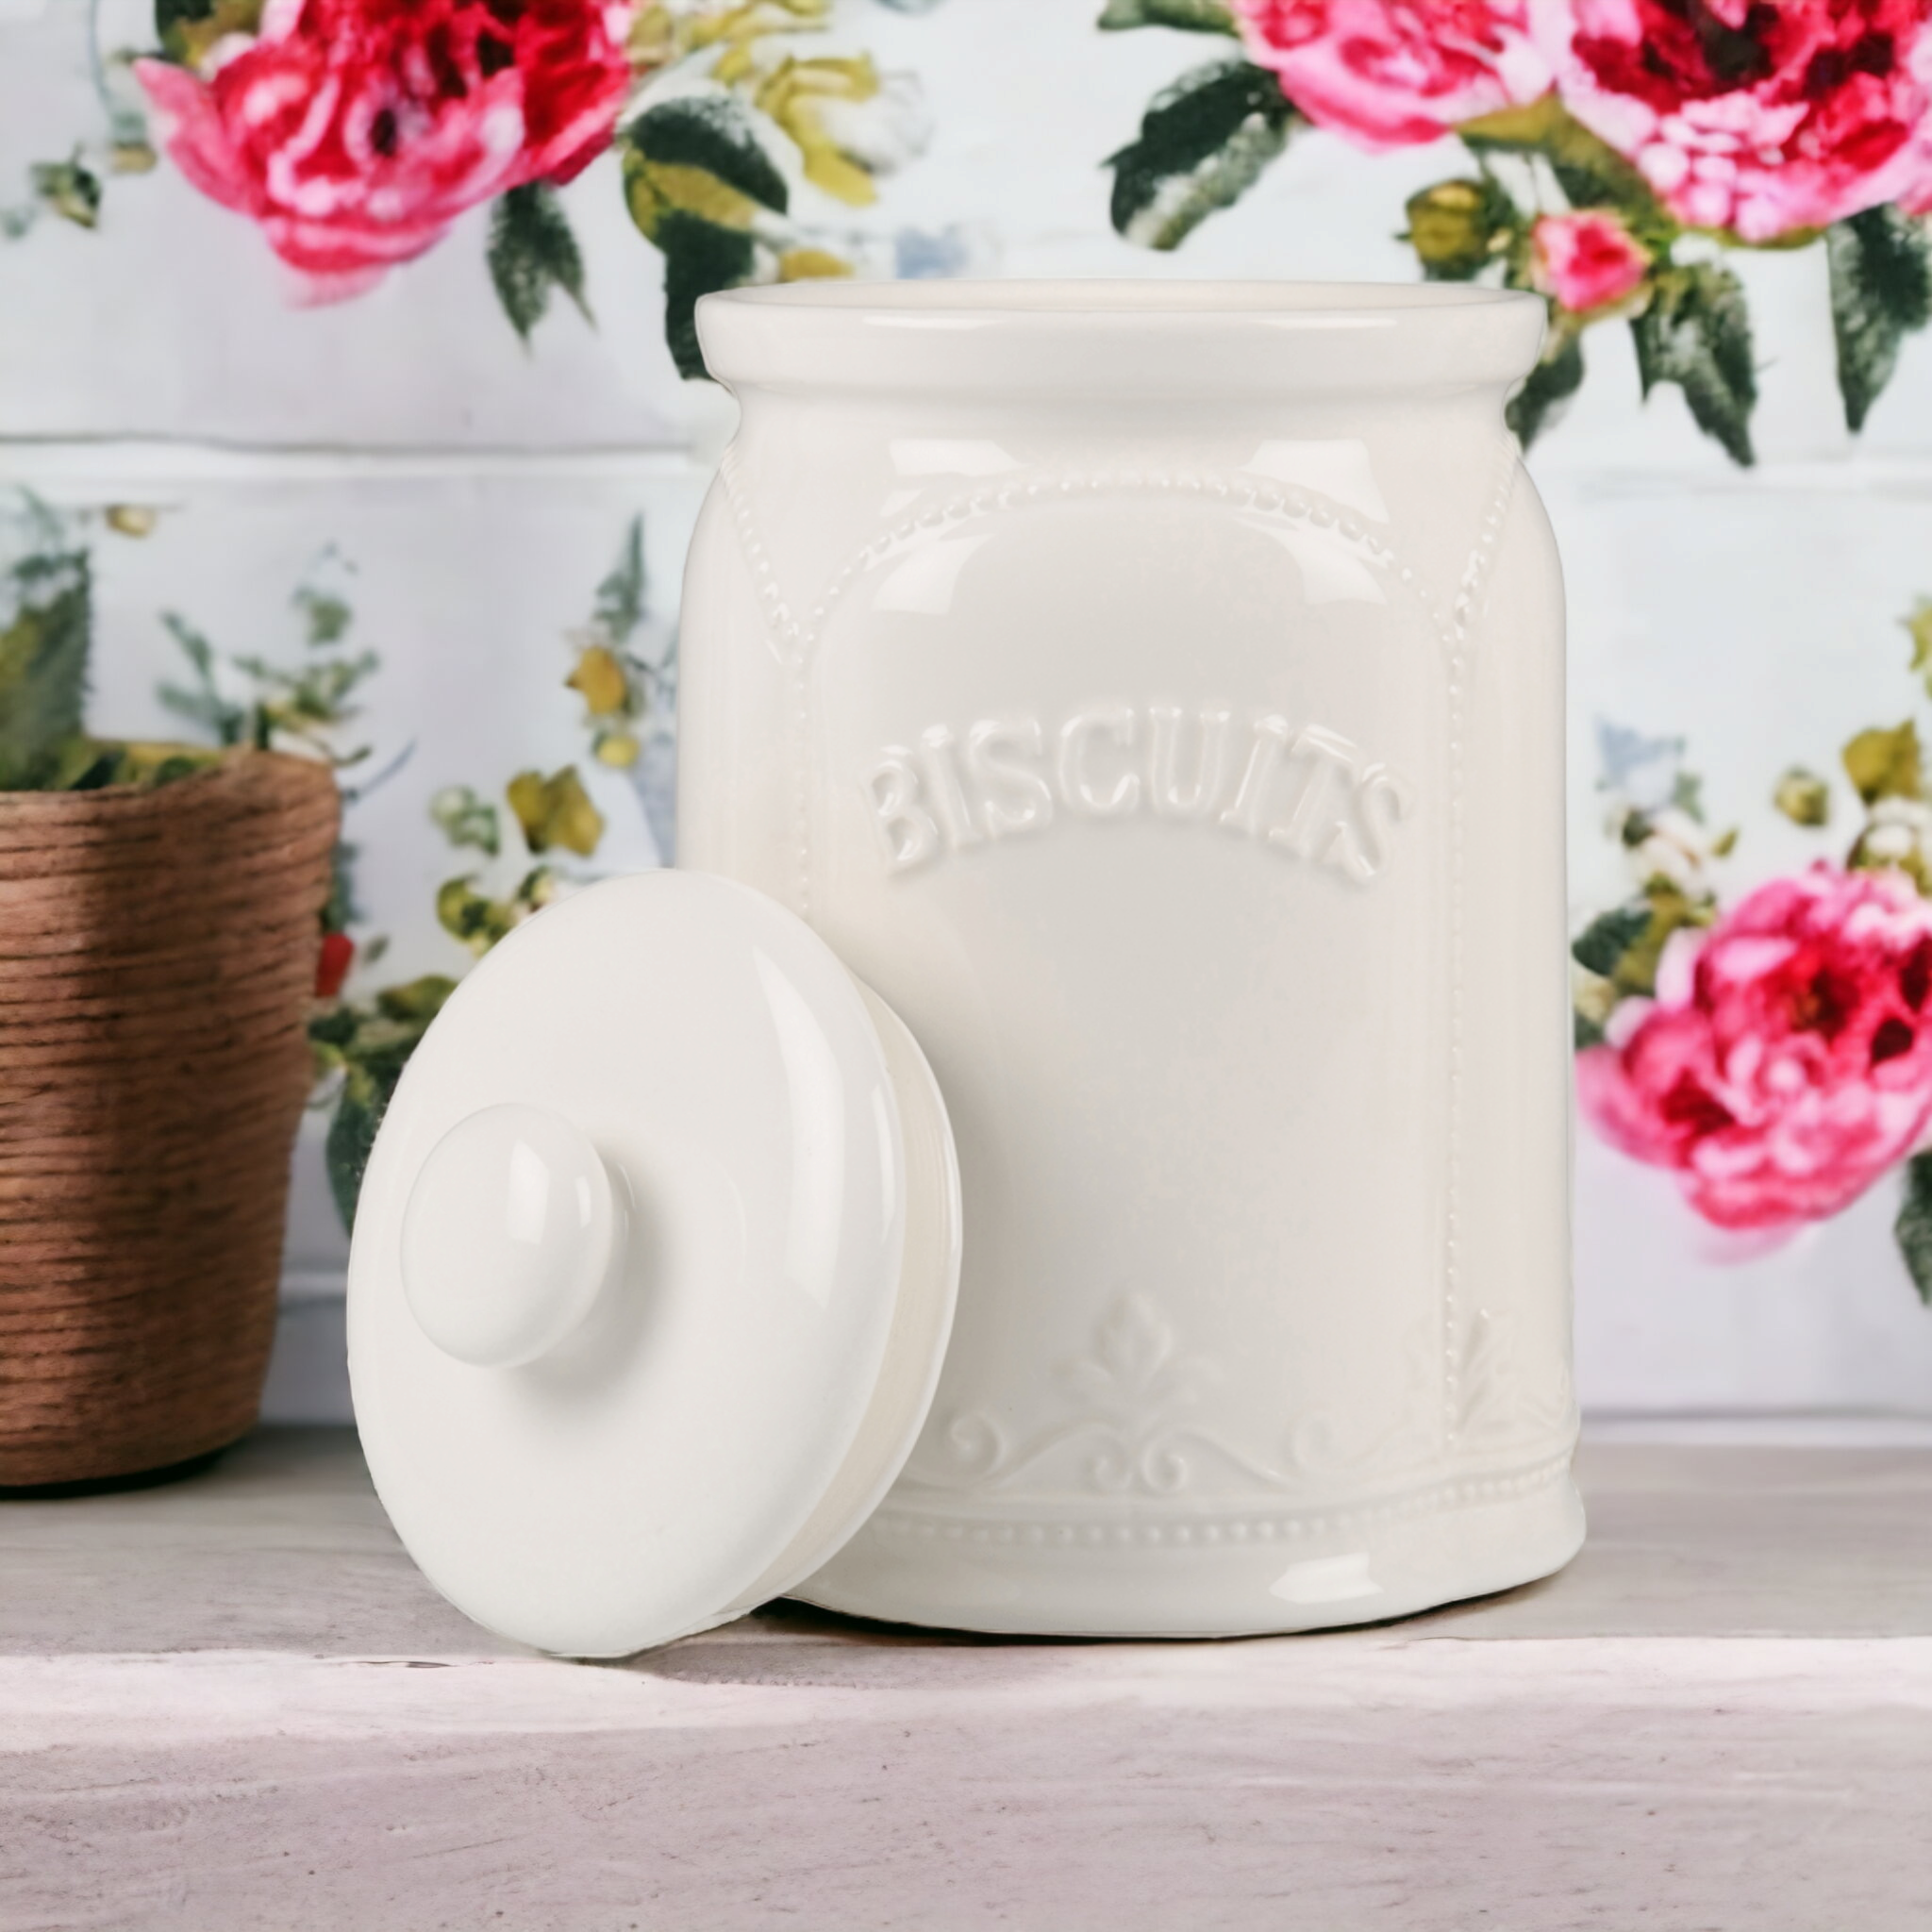 Vintage Ceramic Biscuit Canister with Lid